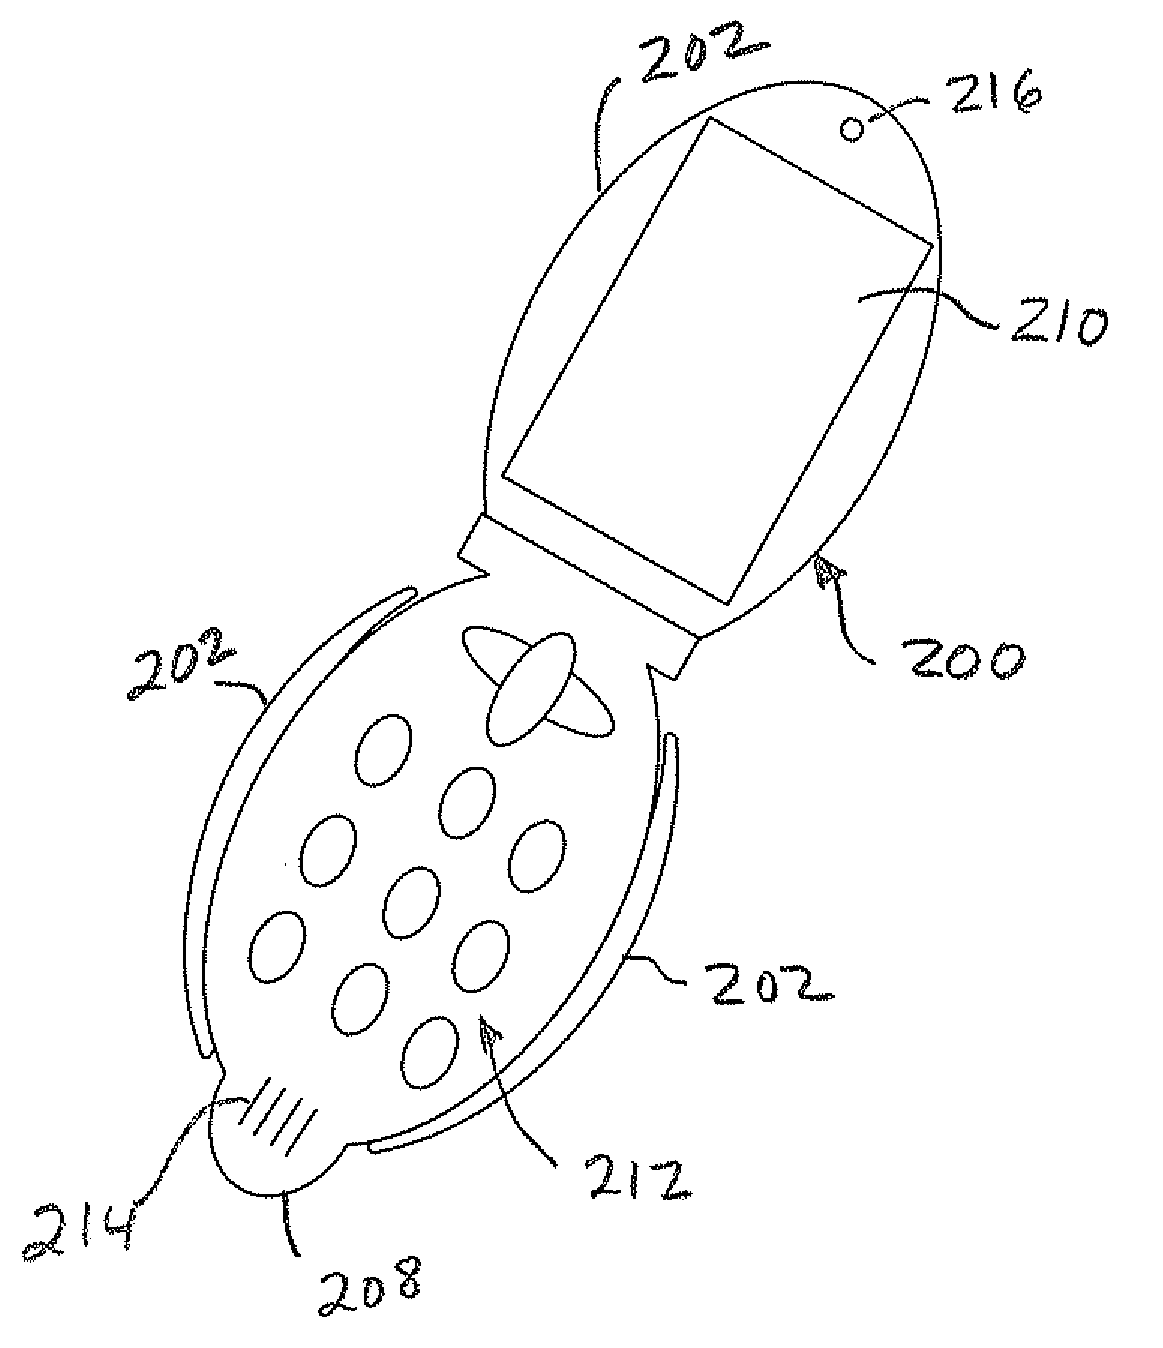 Tactile alerting mechanism for portable communications device